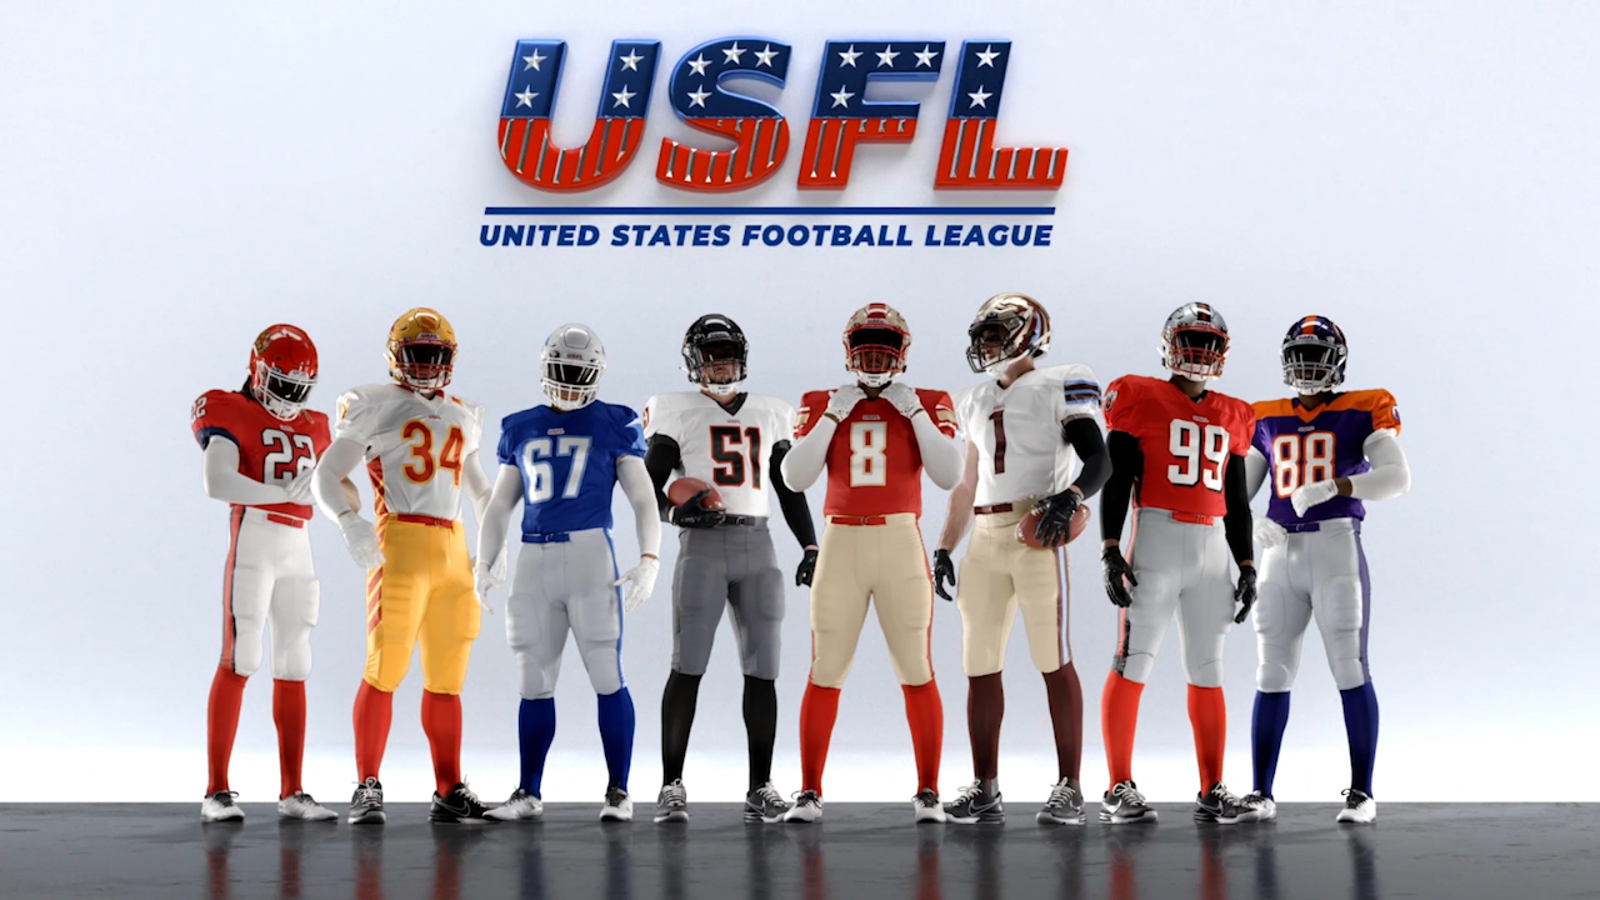 USFL uniforms for all eight teams